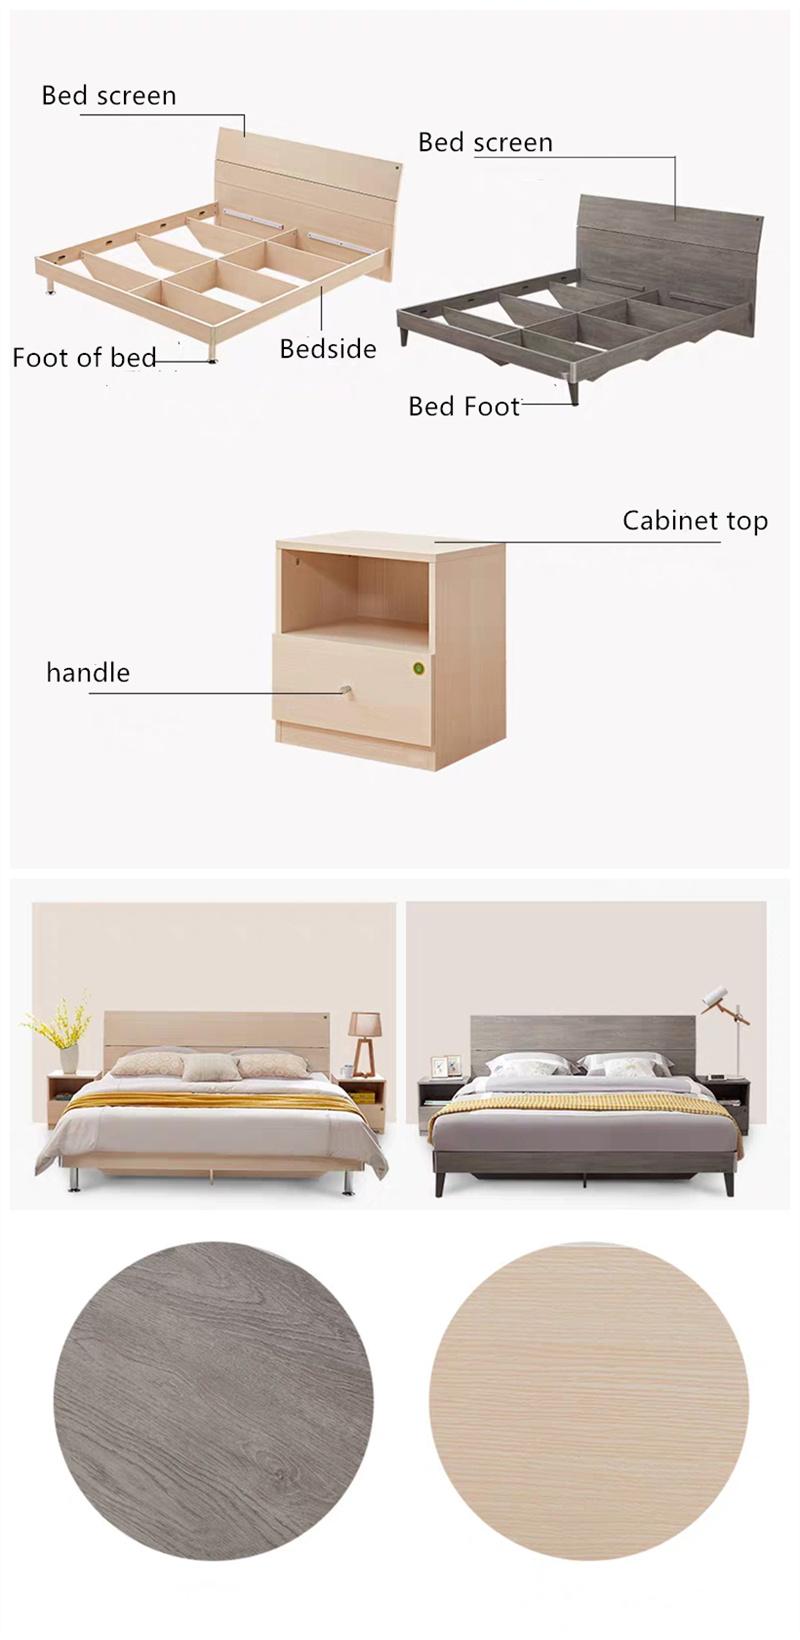 Hot Selling Custom Low Prices Double Leather Mosquito Net Bed Bedroom Furniture Bed